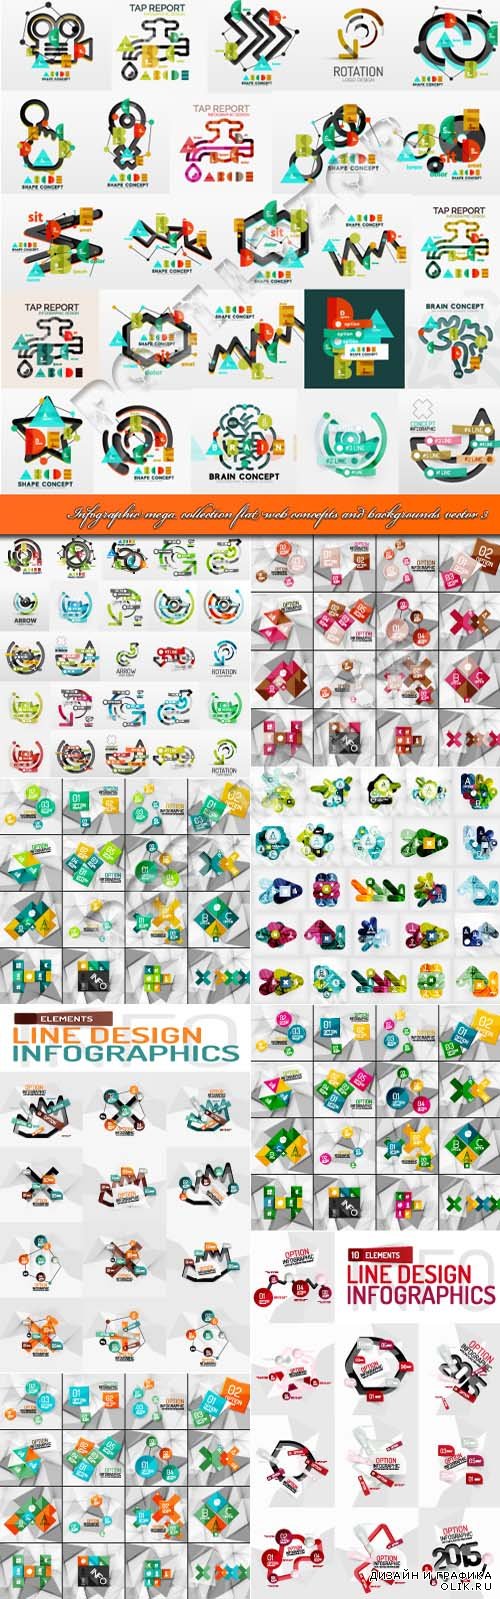 Infographic mega collection flat web concepts and backgrounds vector 3